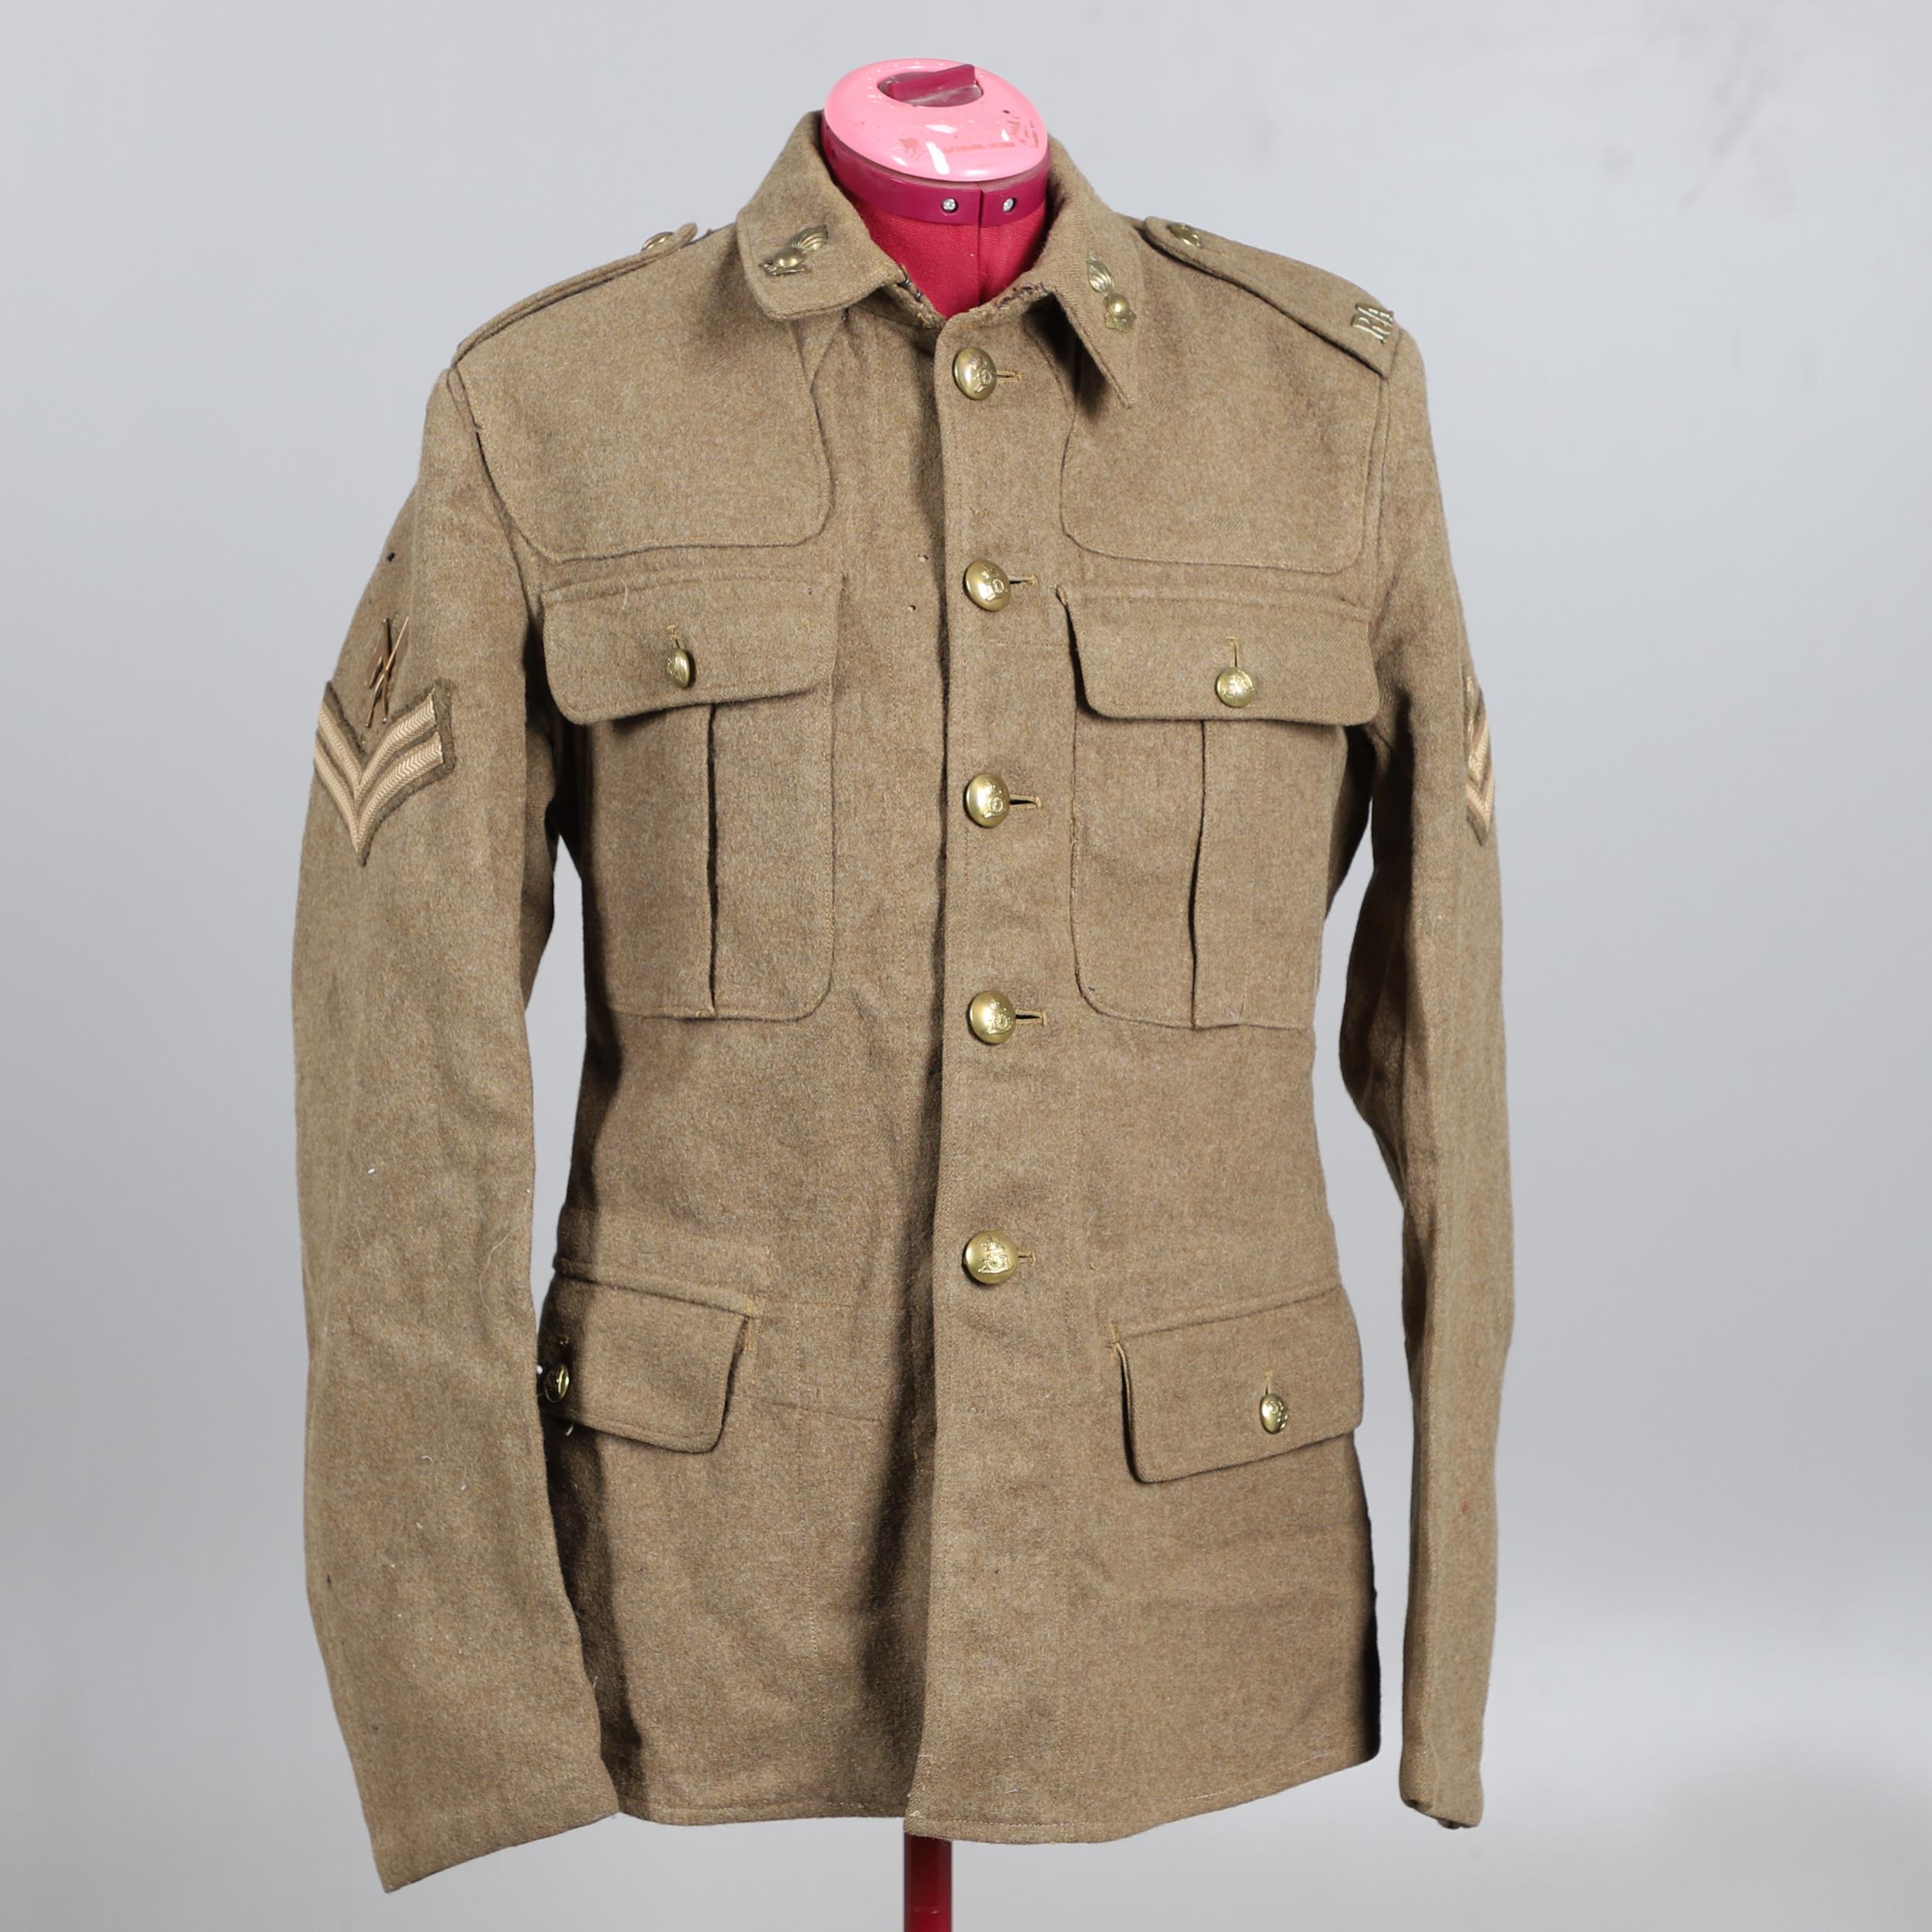 A 1922 PATTERN ARMY TUNIC WITH ROYAL ARTILLERY BUTTONS.